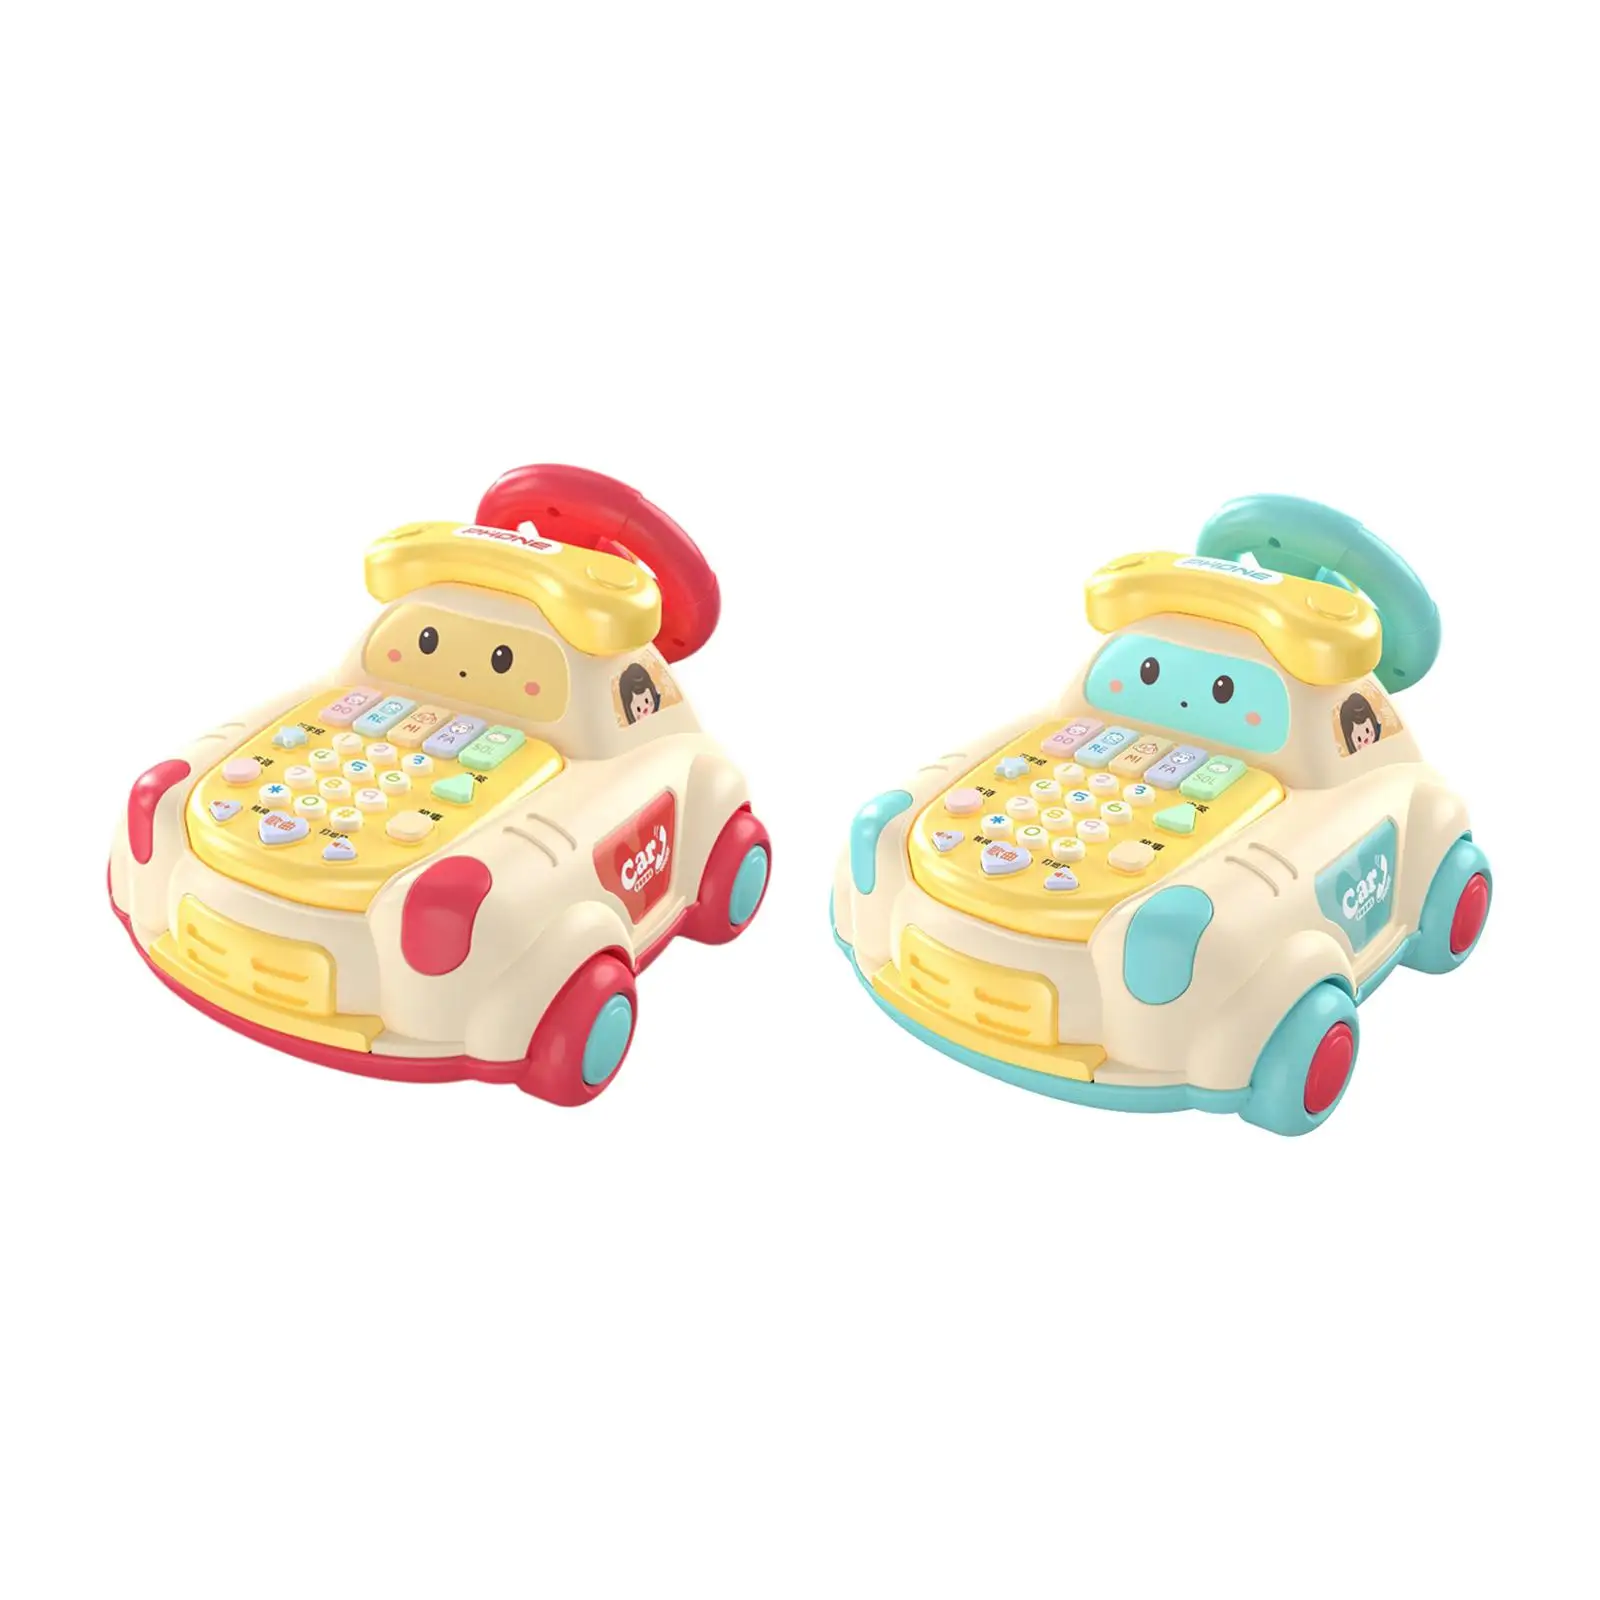 Children Phone Toy Movable Multifunctional Educational Baby Telephone Toy for Development Learning Education Activity Preschool